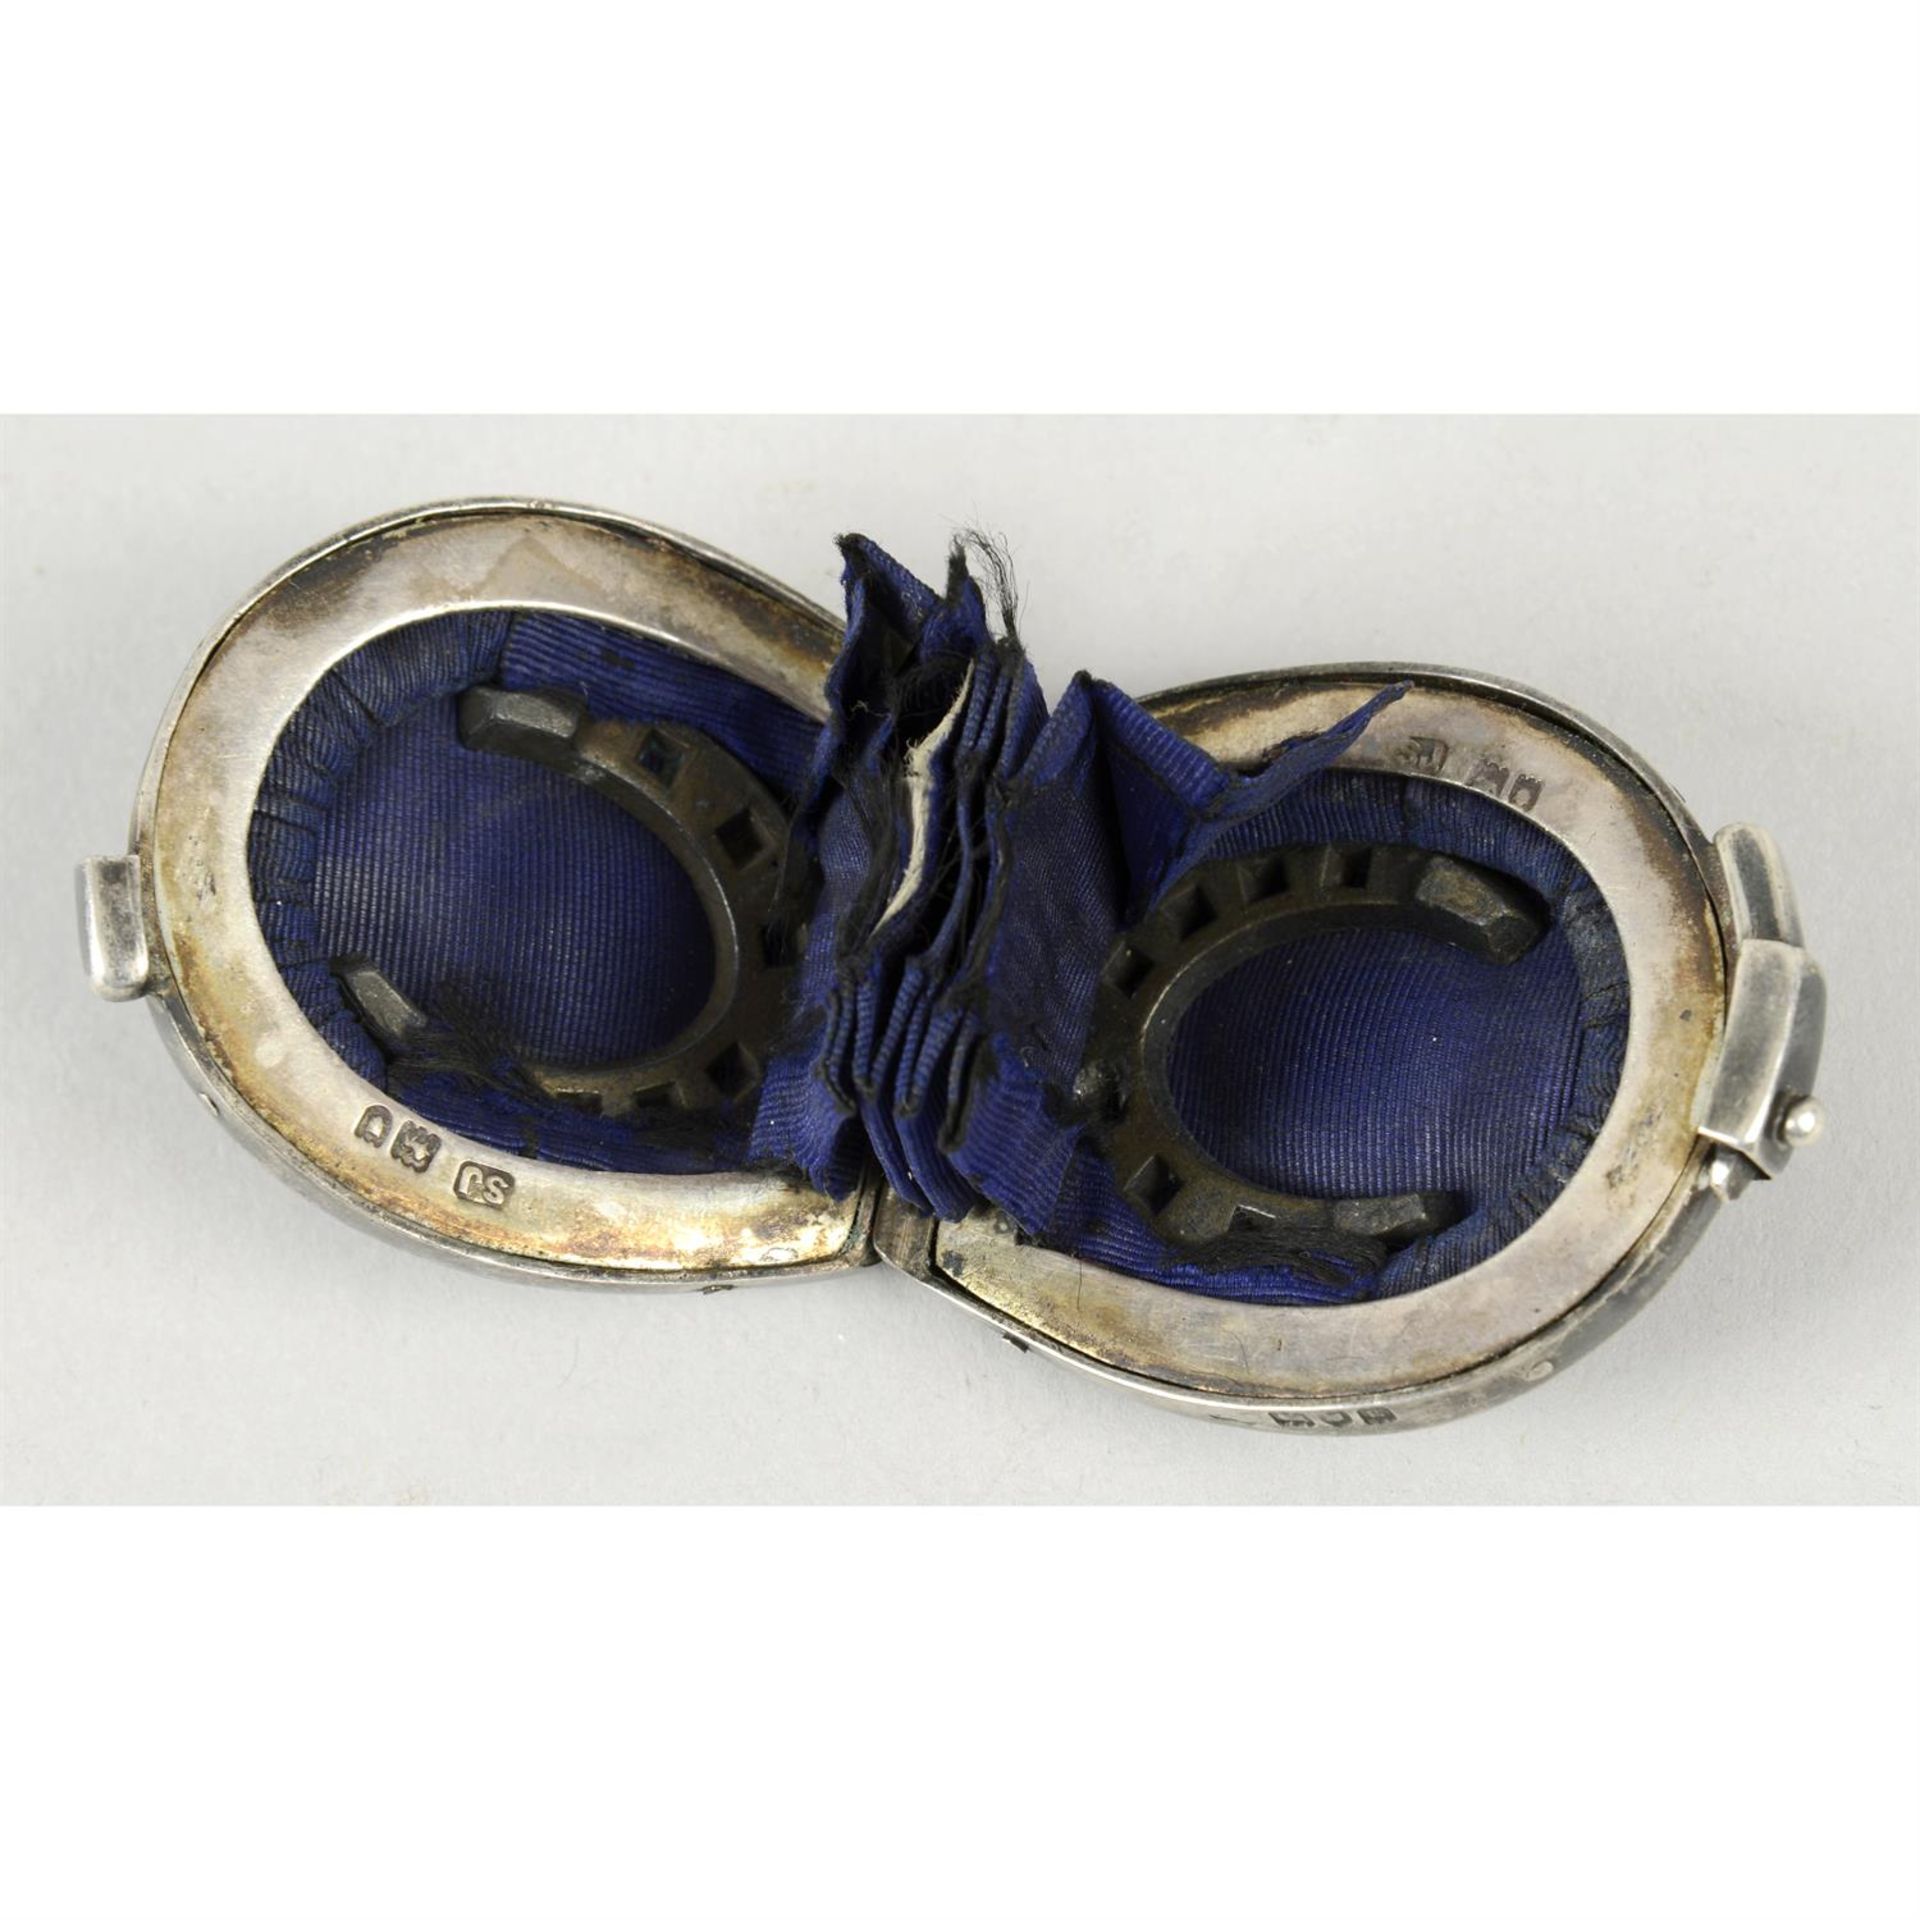 A Edwardian silver mounted & leather horseshoe coin purse. - Image 2 of 3